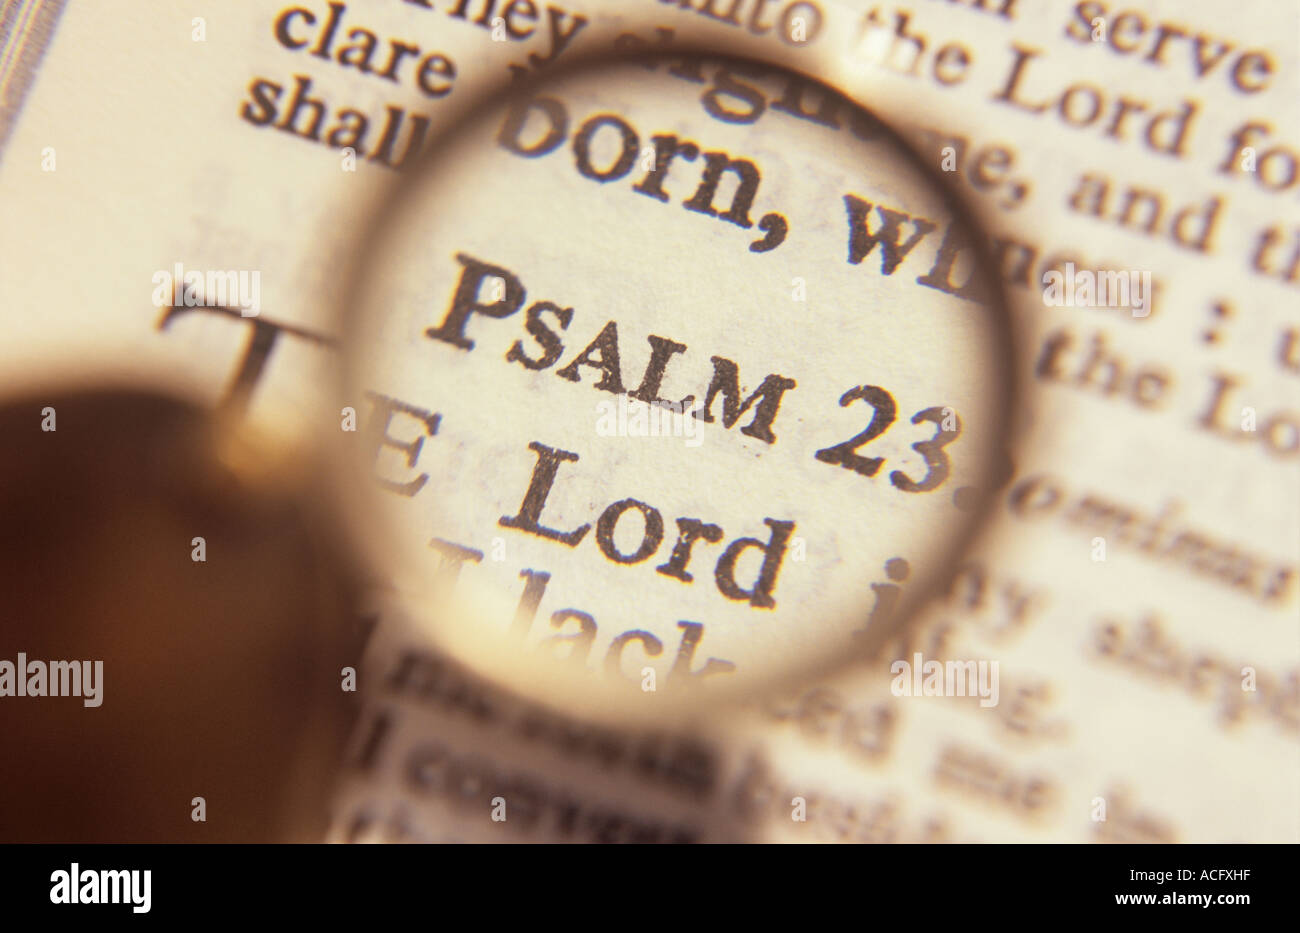 Close up of a pocket magnifier held over a Holy Bible and magnifying particularly the words Psalm 23 and Lord and born Stock Photo